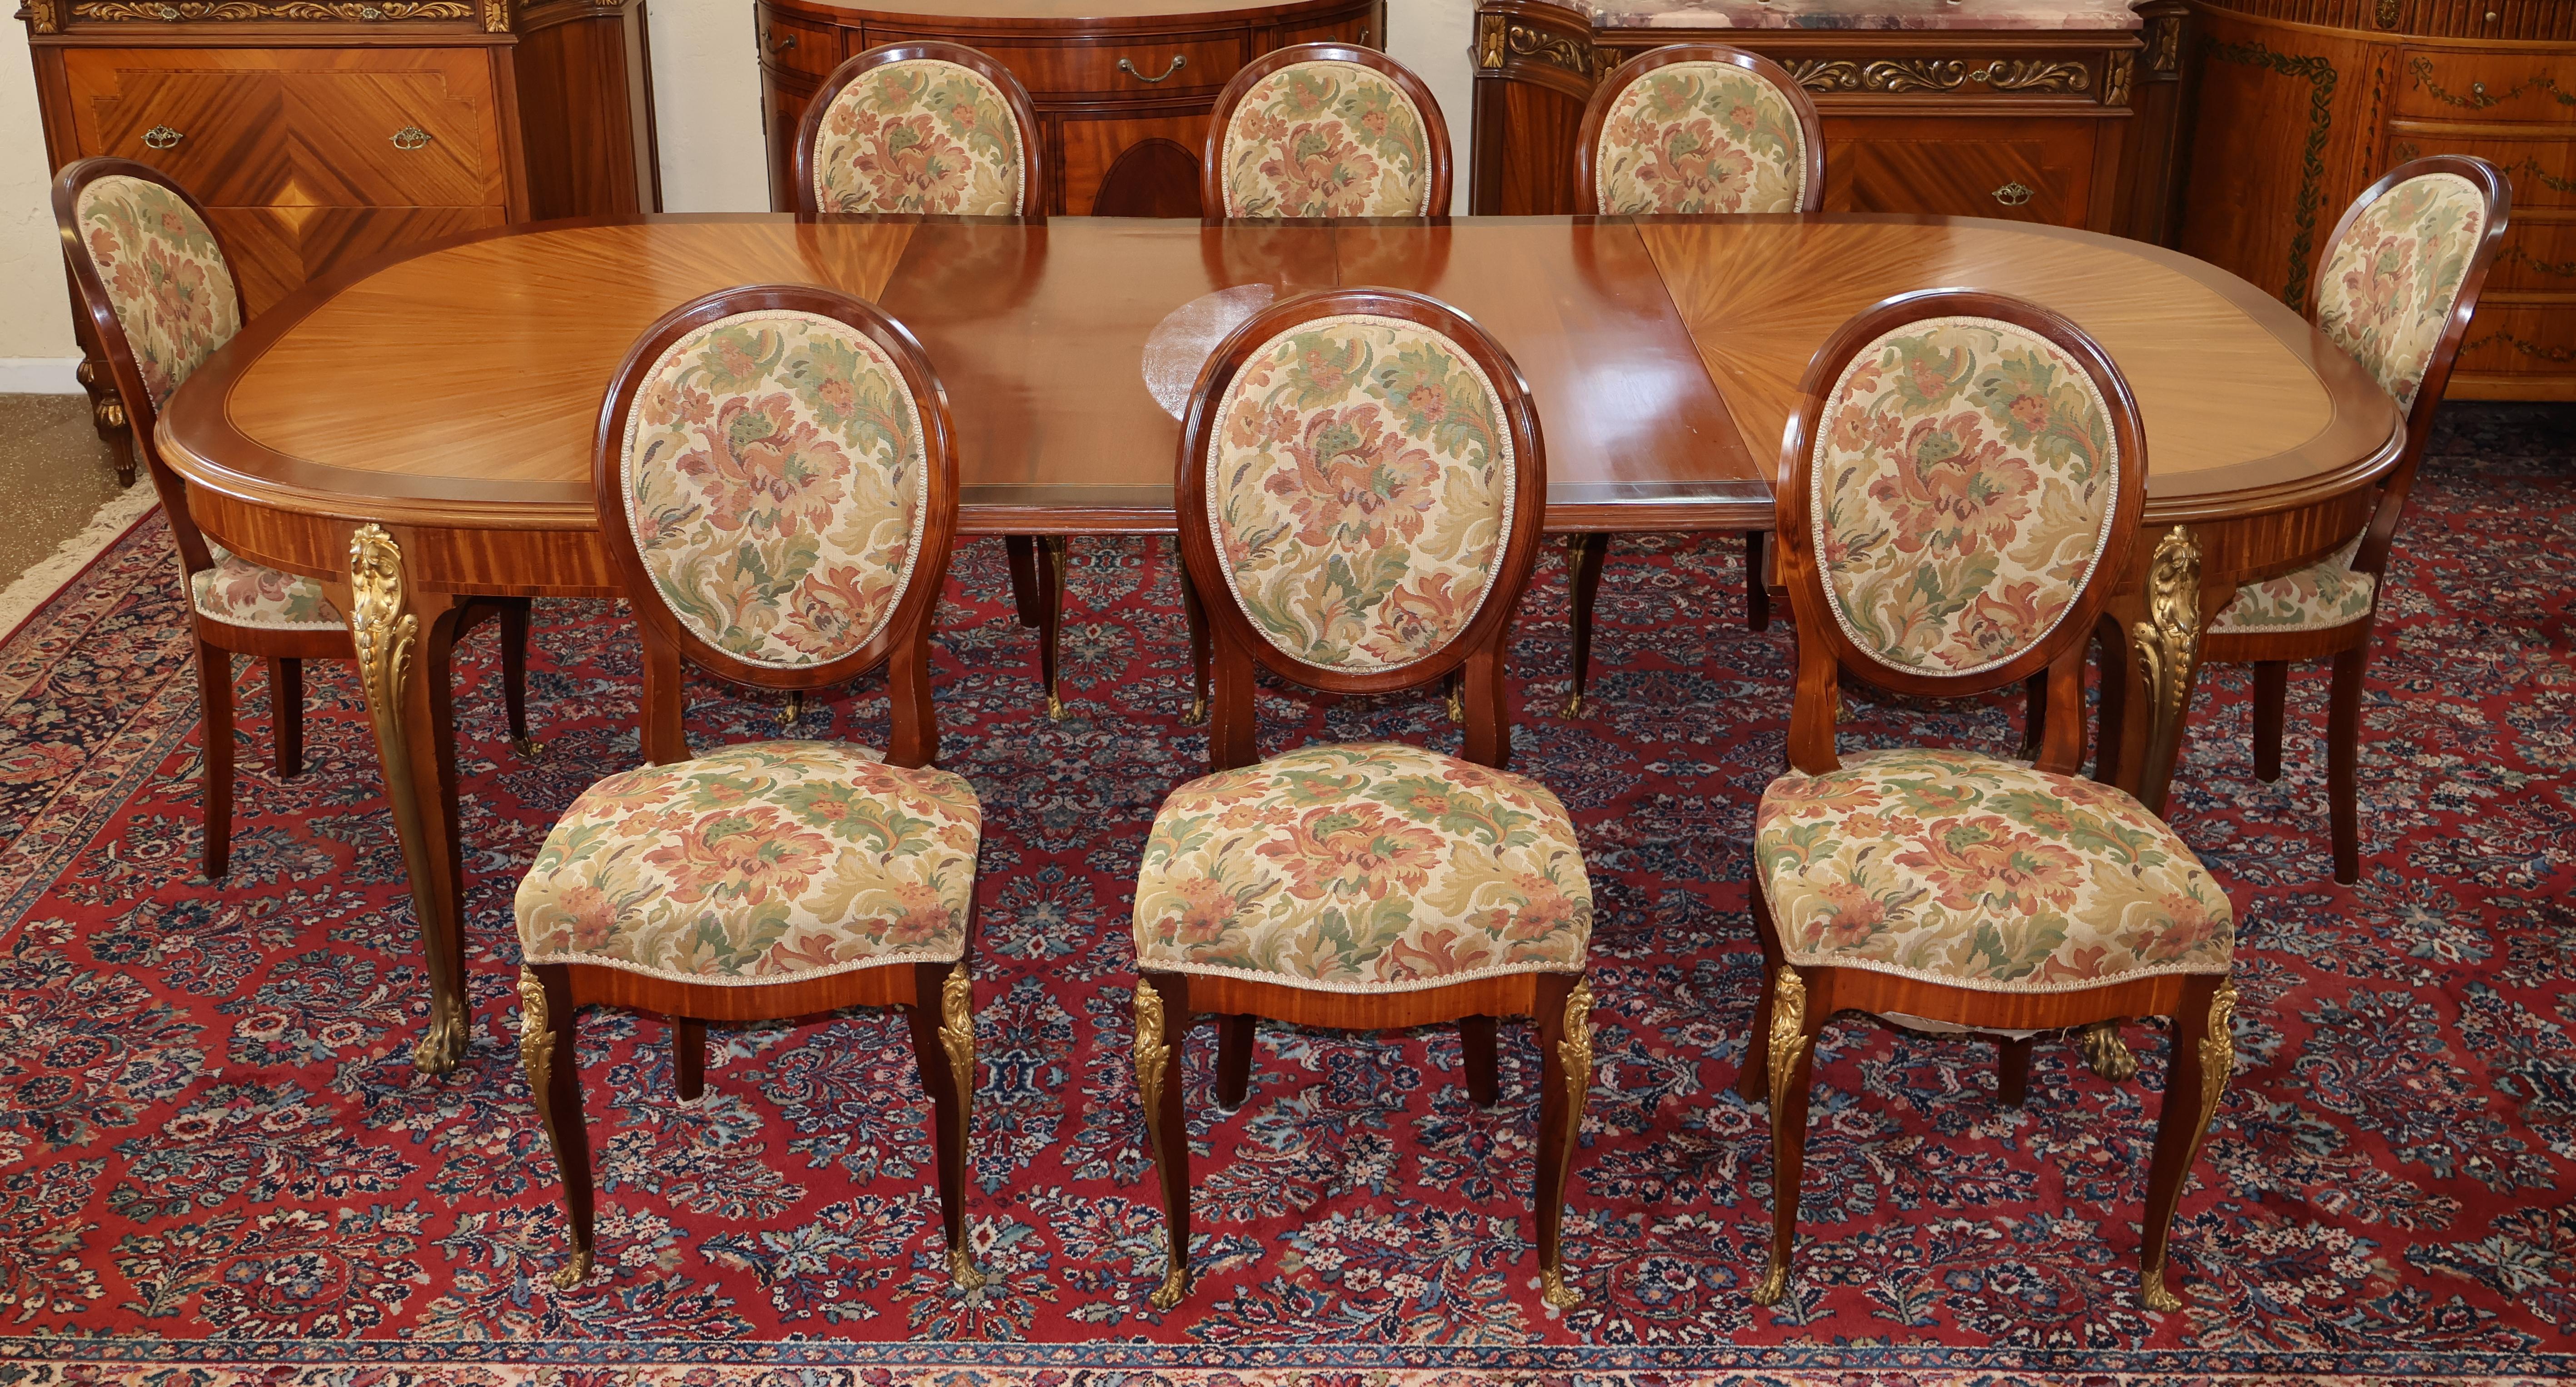 ​Late 19th Century French Bronze Mounted Kingwood Dining Set 8 Chairs

Dimensions : Chairs - 38.5